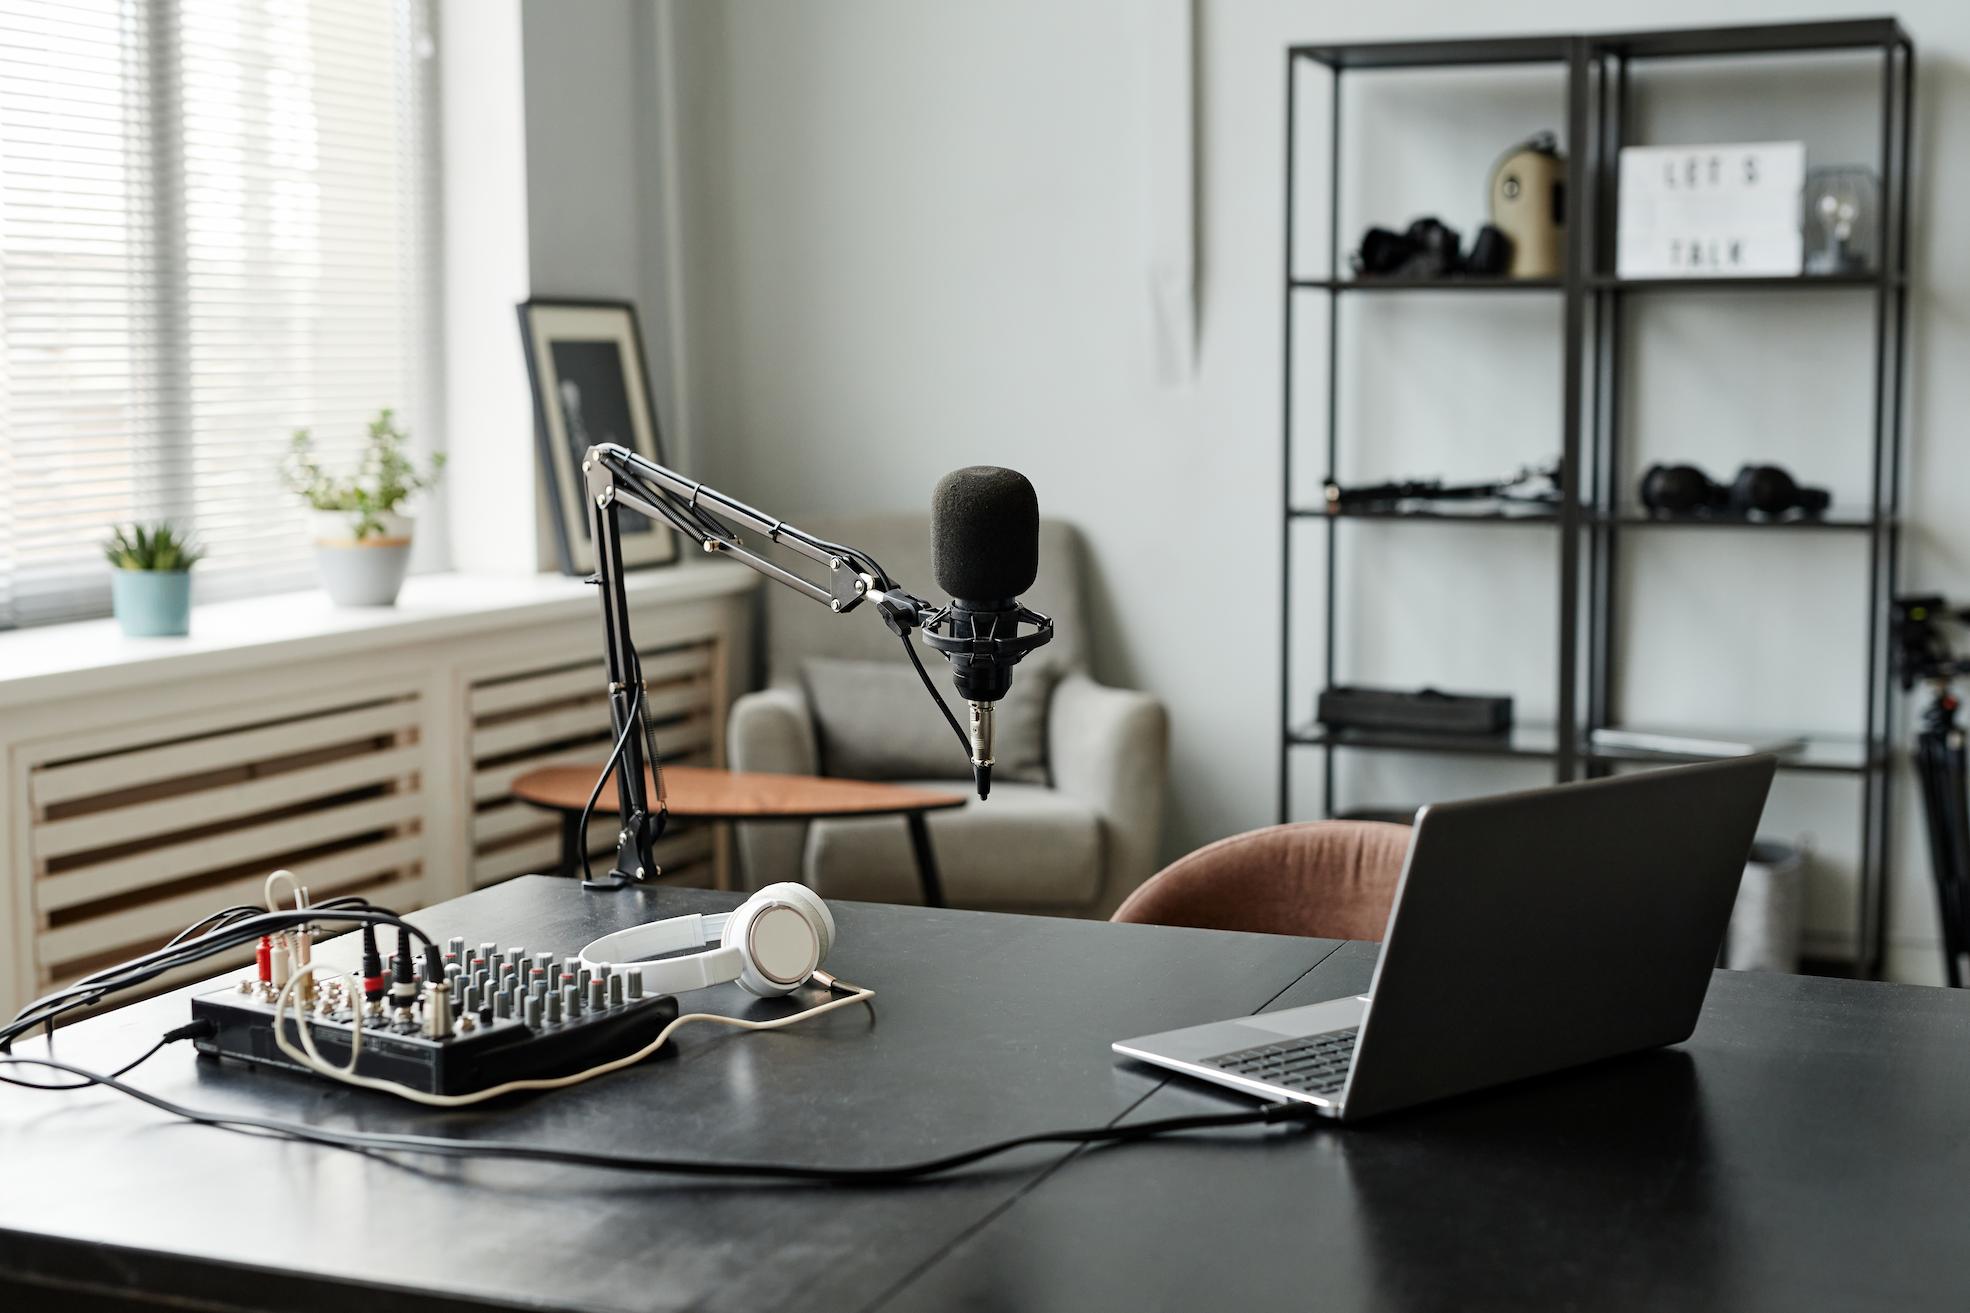 An image of a podcaster's setup requiring a home business licence.